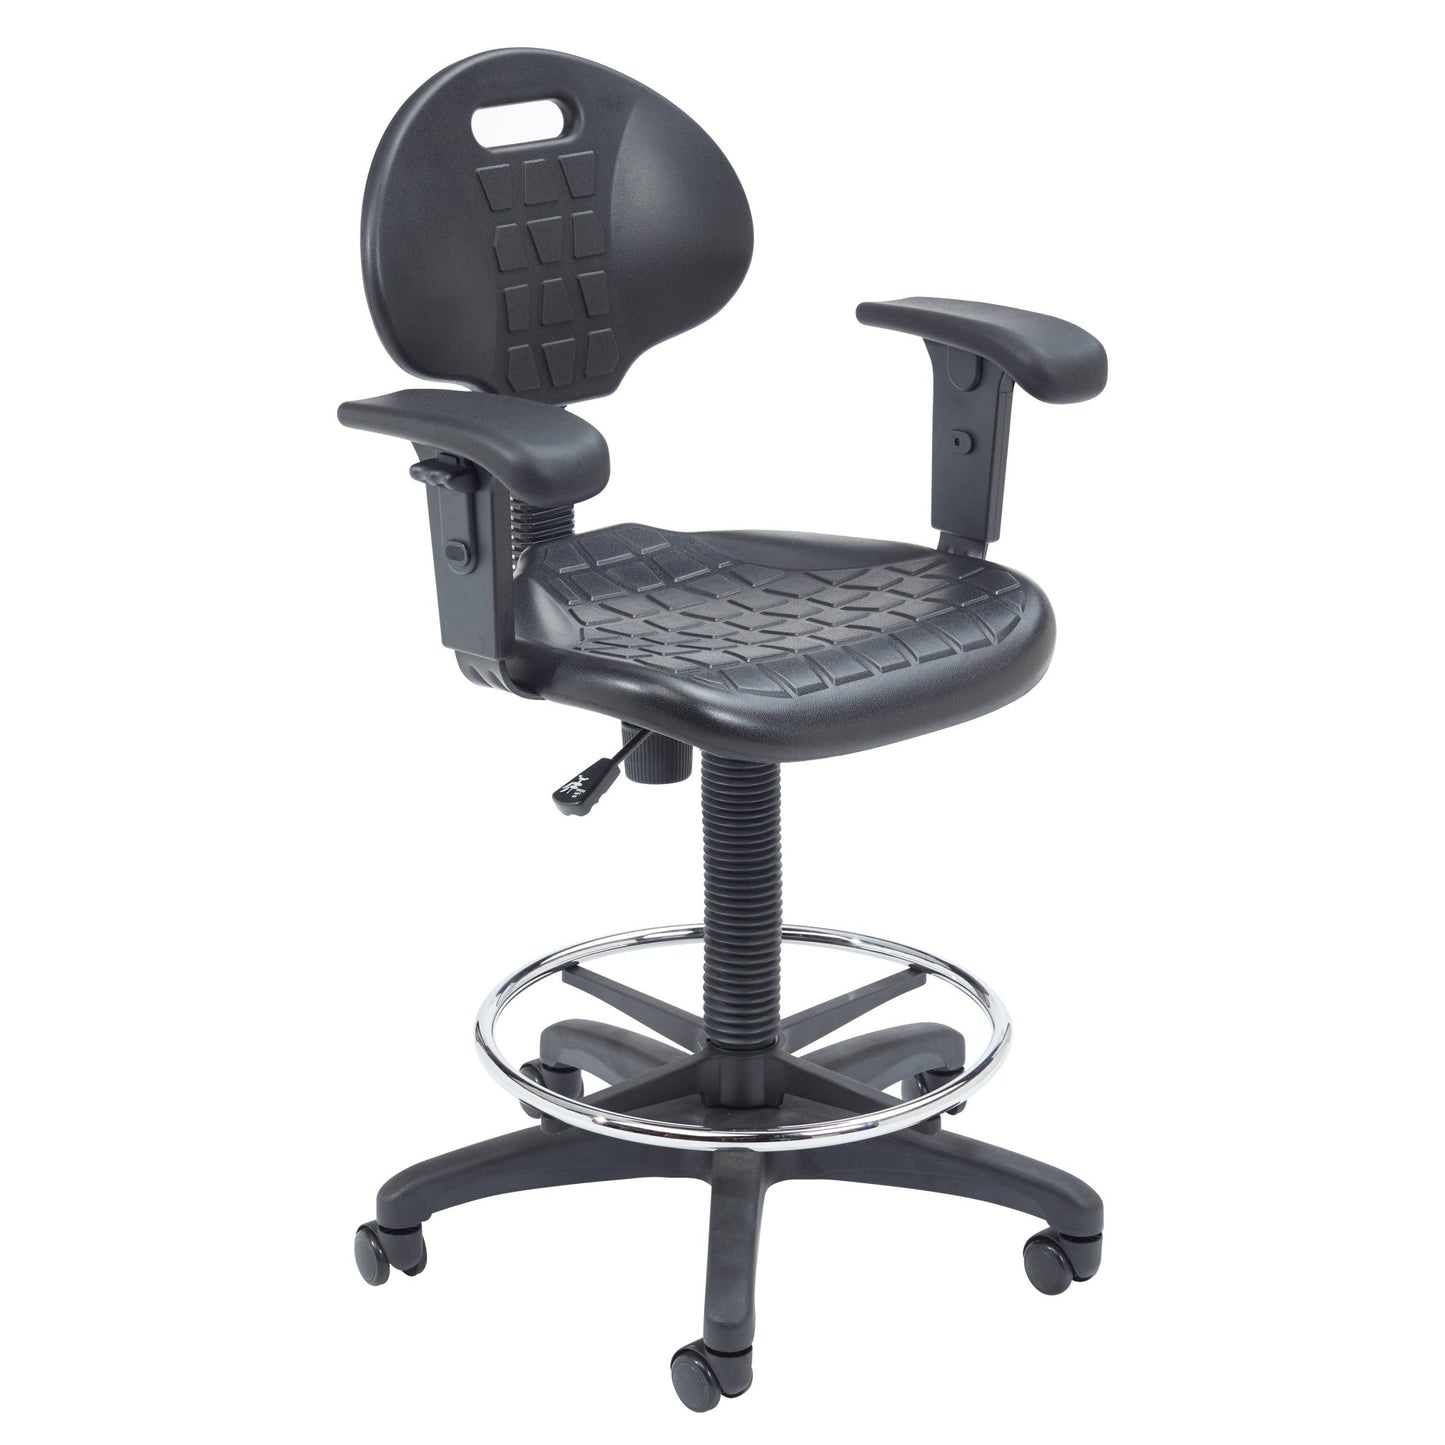 NPS Kangaroo Shop Stool Polyurethane Seat and Backrest with Arms adjusts 22" - 32" H - for Offices, Classrooms, Science and STEM Labs - SchoolOutlet